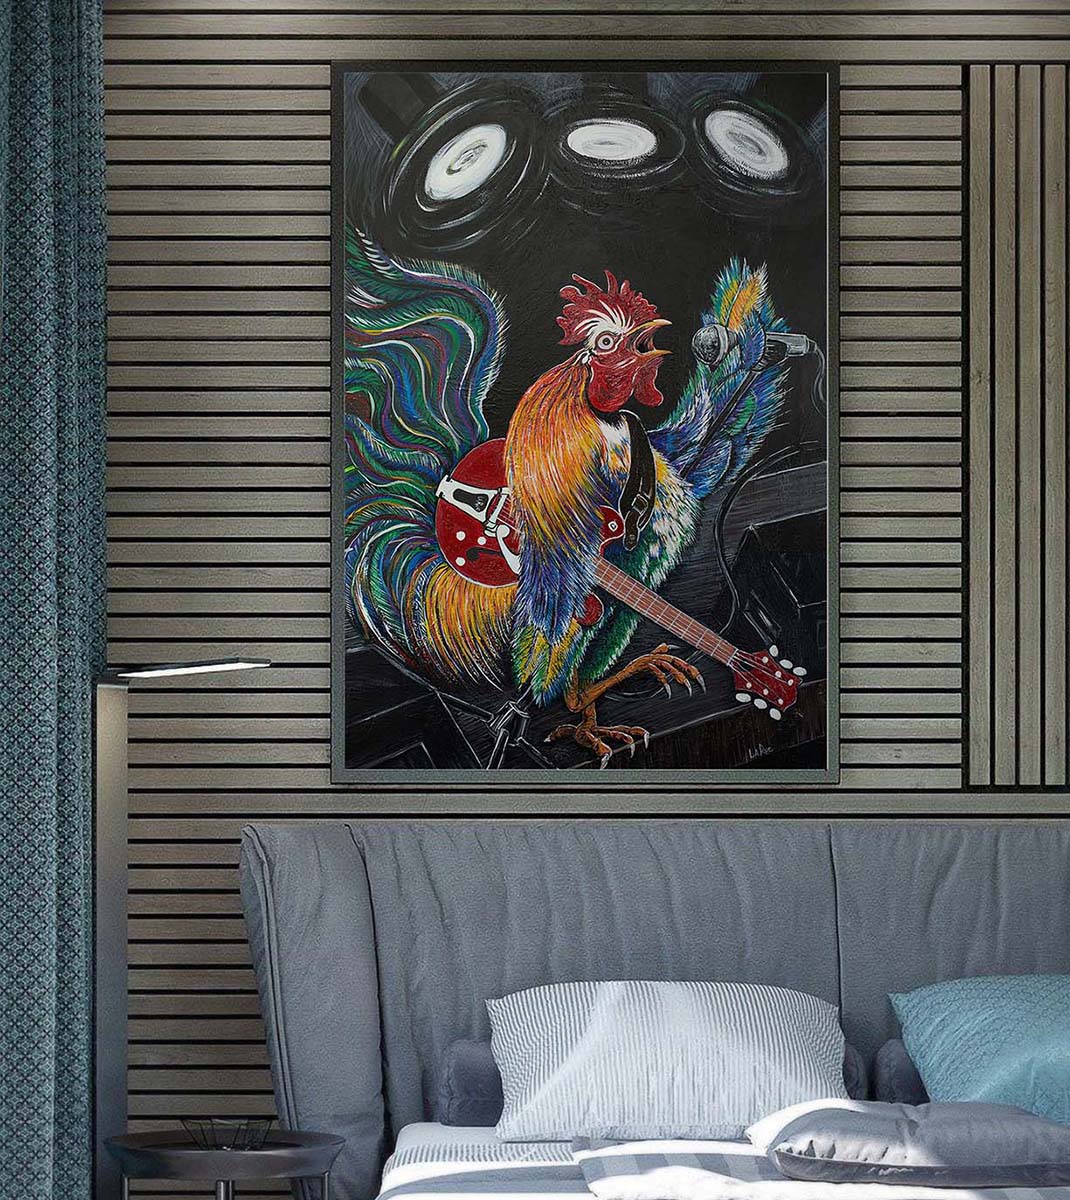 Ruling the Roost﻿ framed print on a wood panel wall over a bed